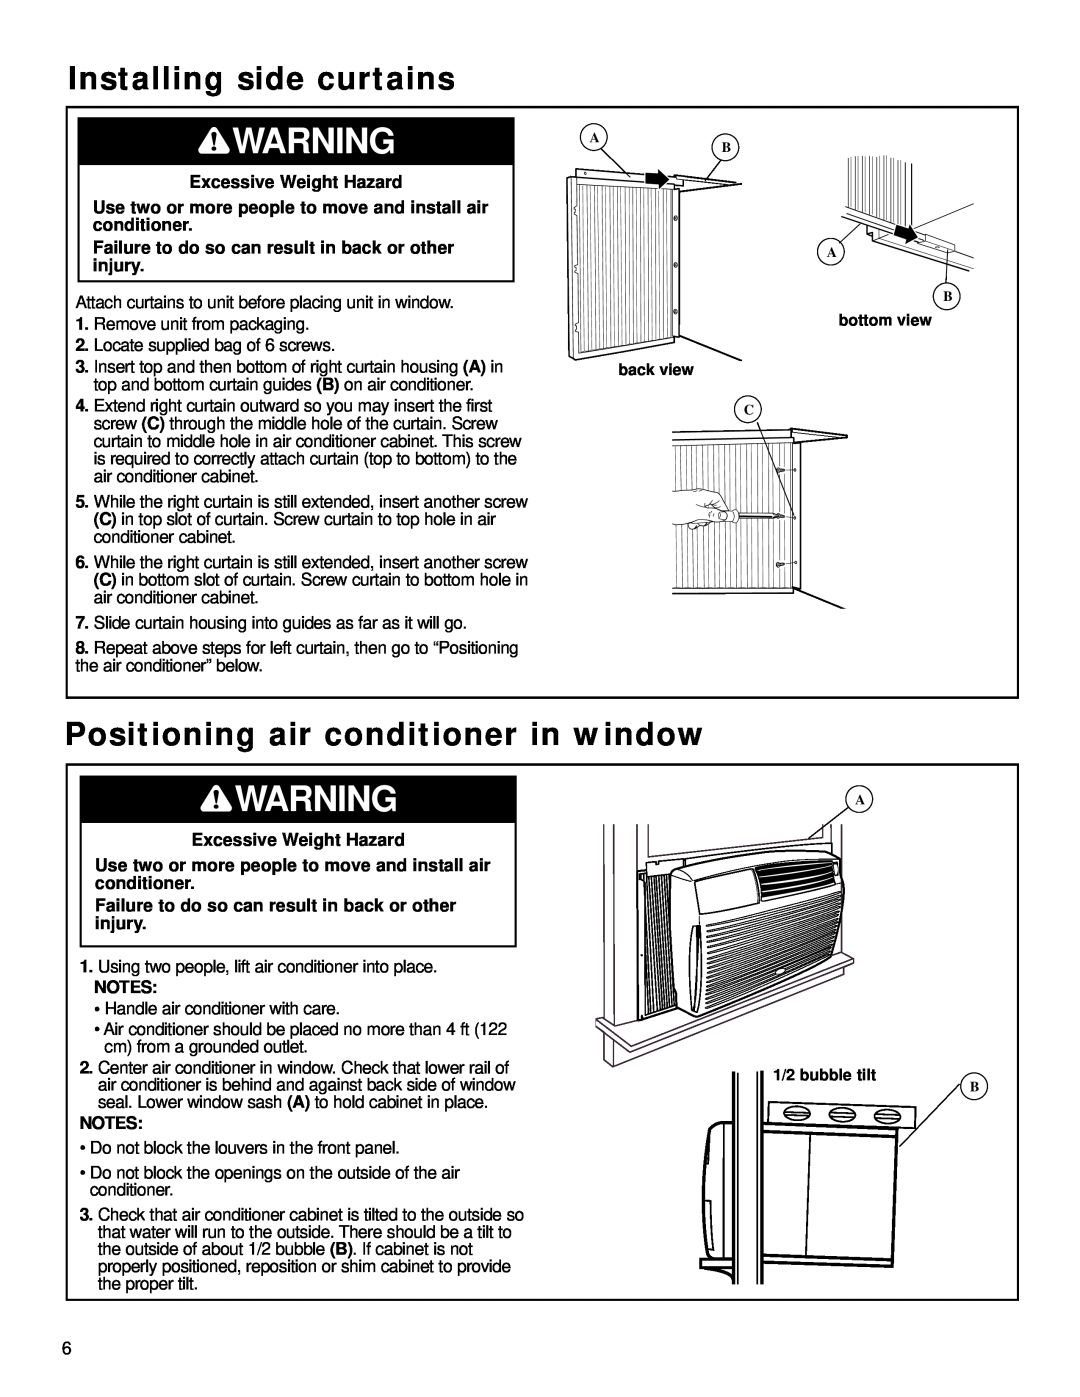 Whirlpool ACQ058MM0 manual Installing side curtains, Positioning air conditioner in window 